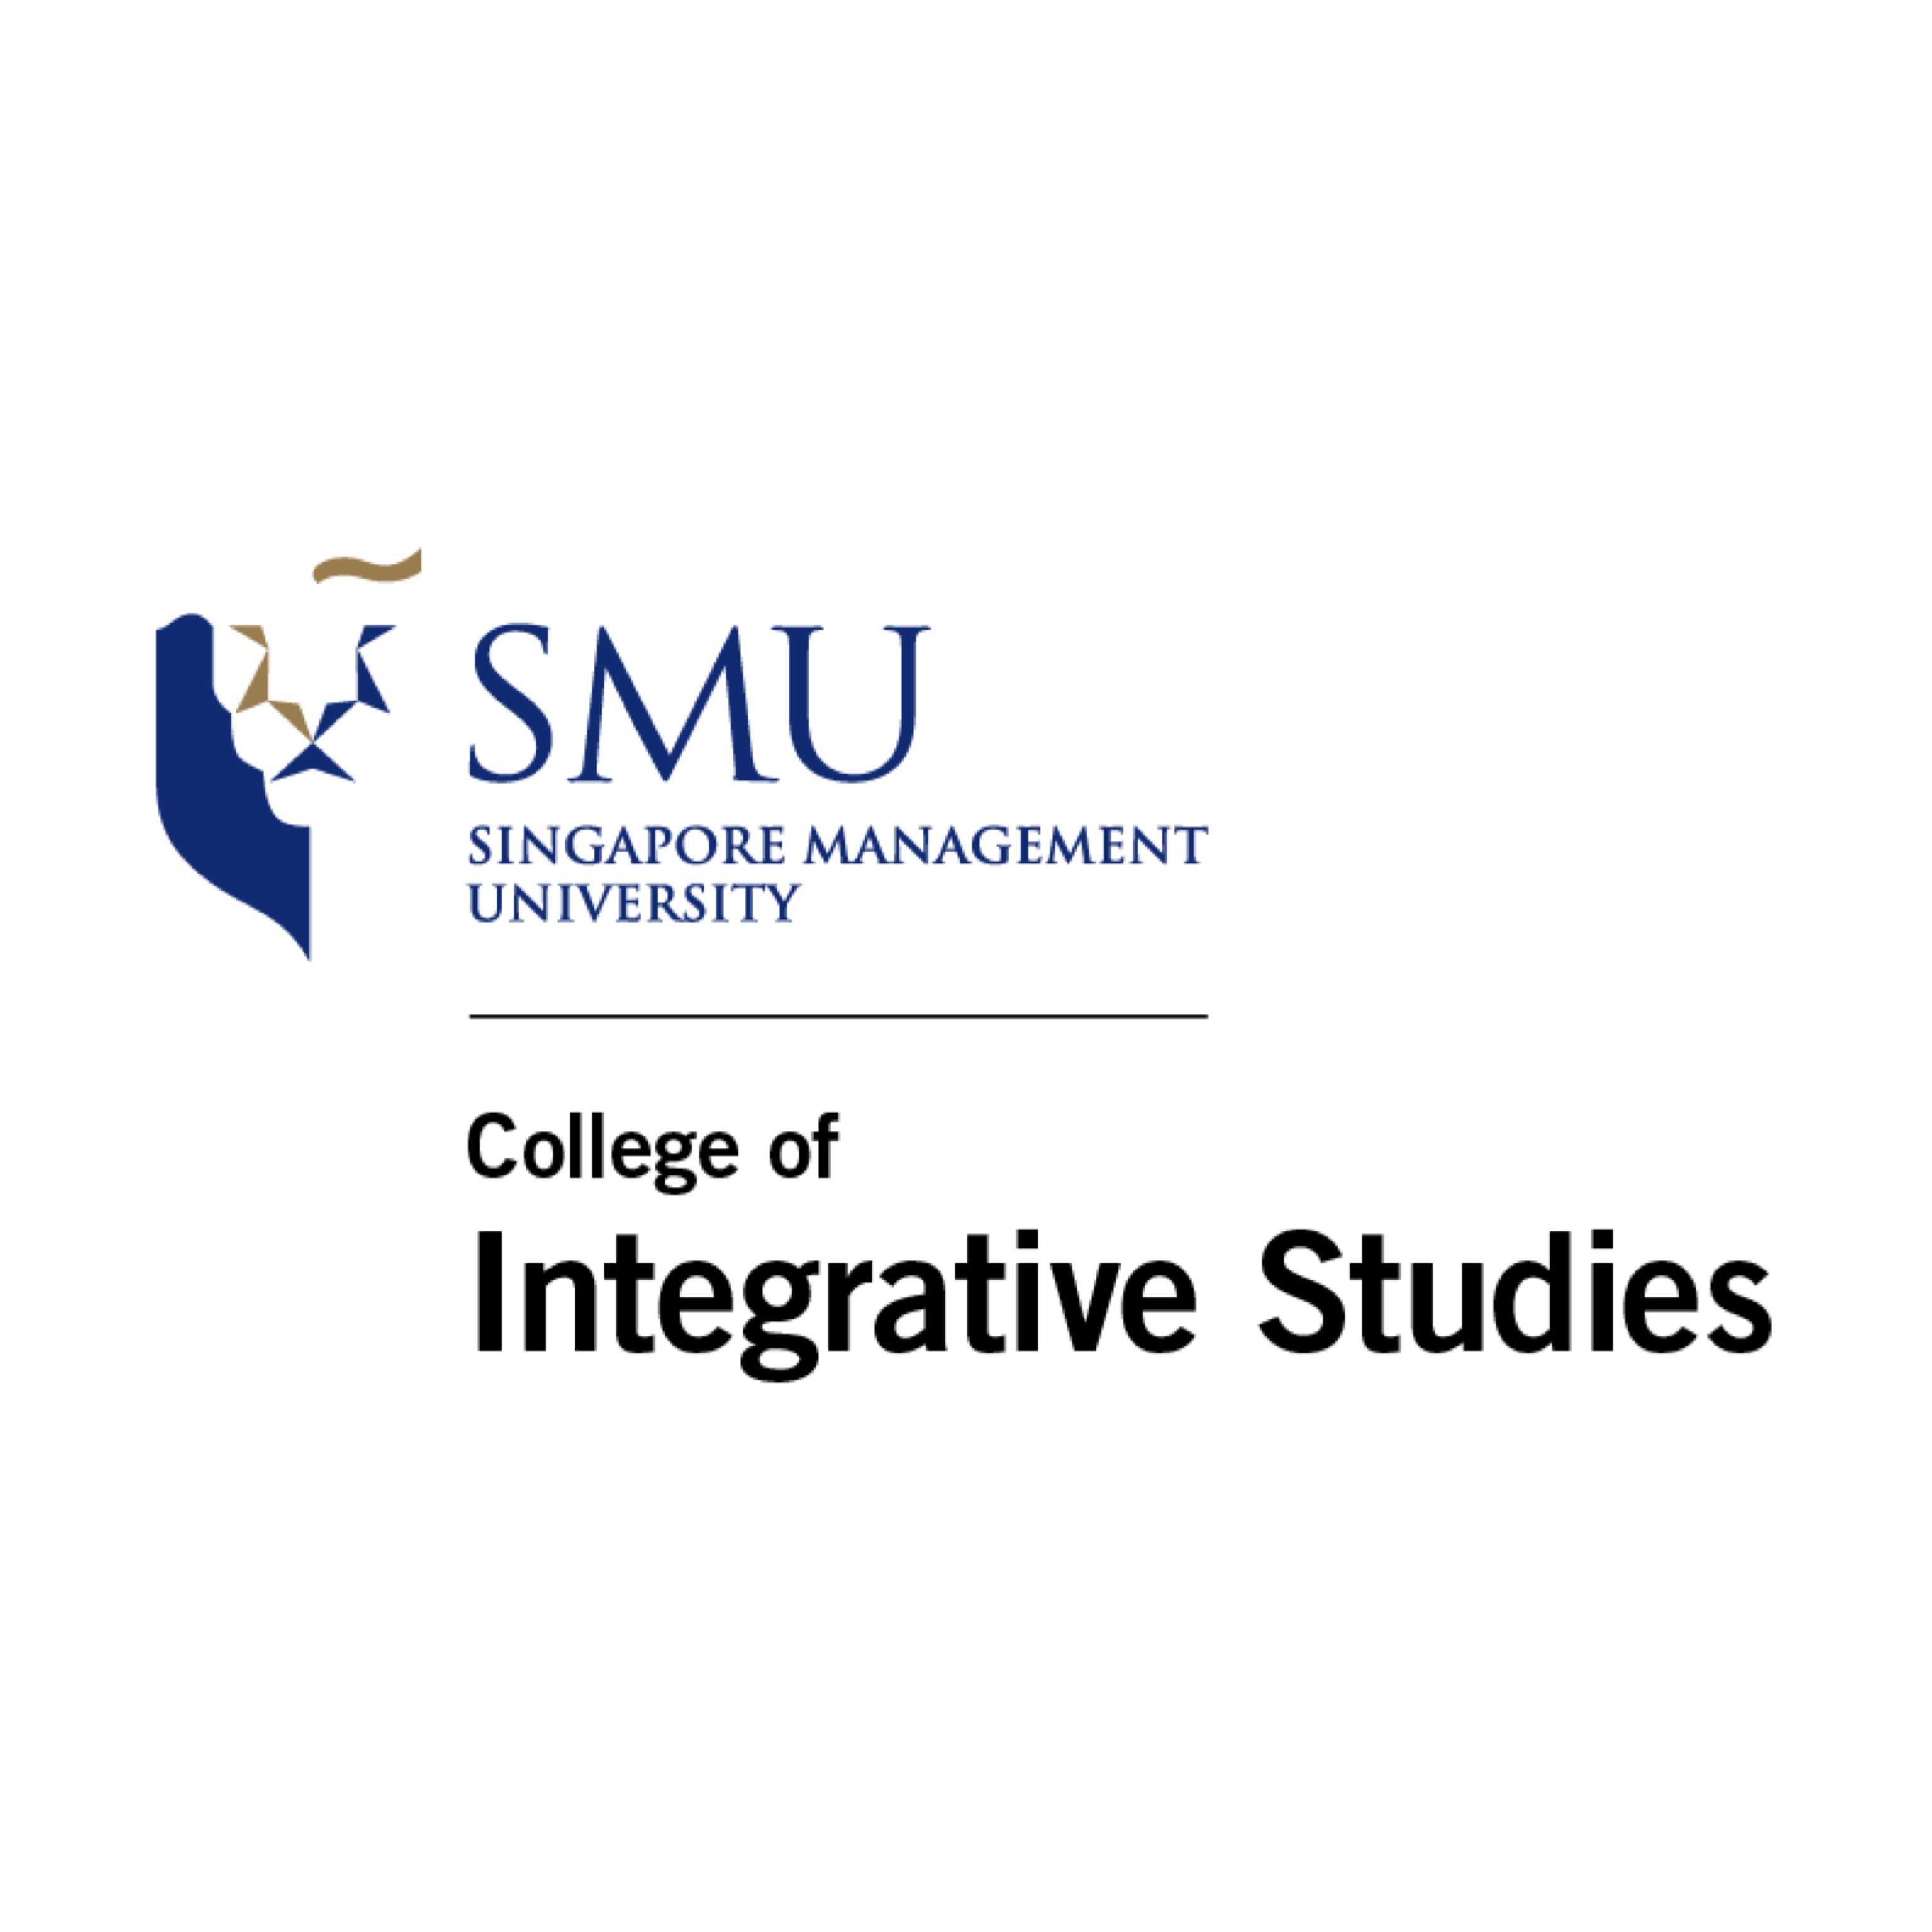 College of Integrative Studies Most Popular Papers (Feb-Apr 2023)